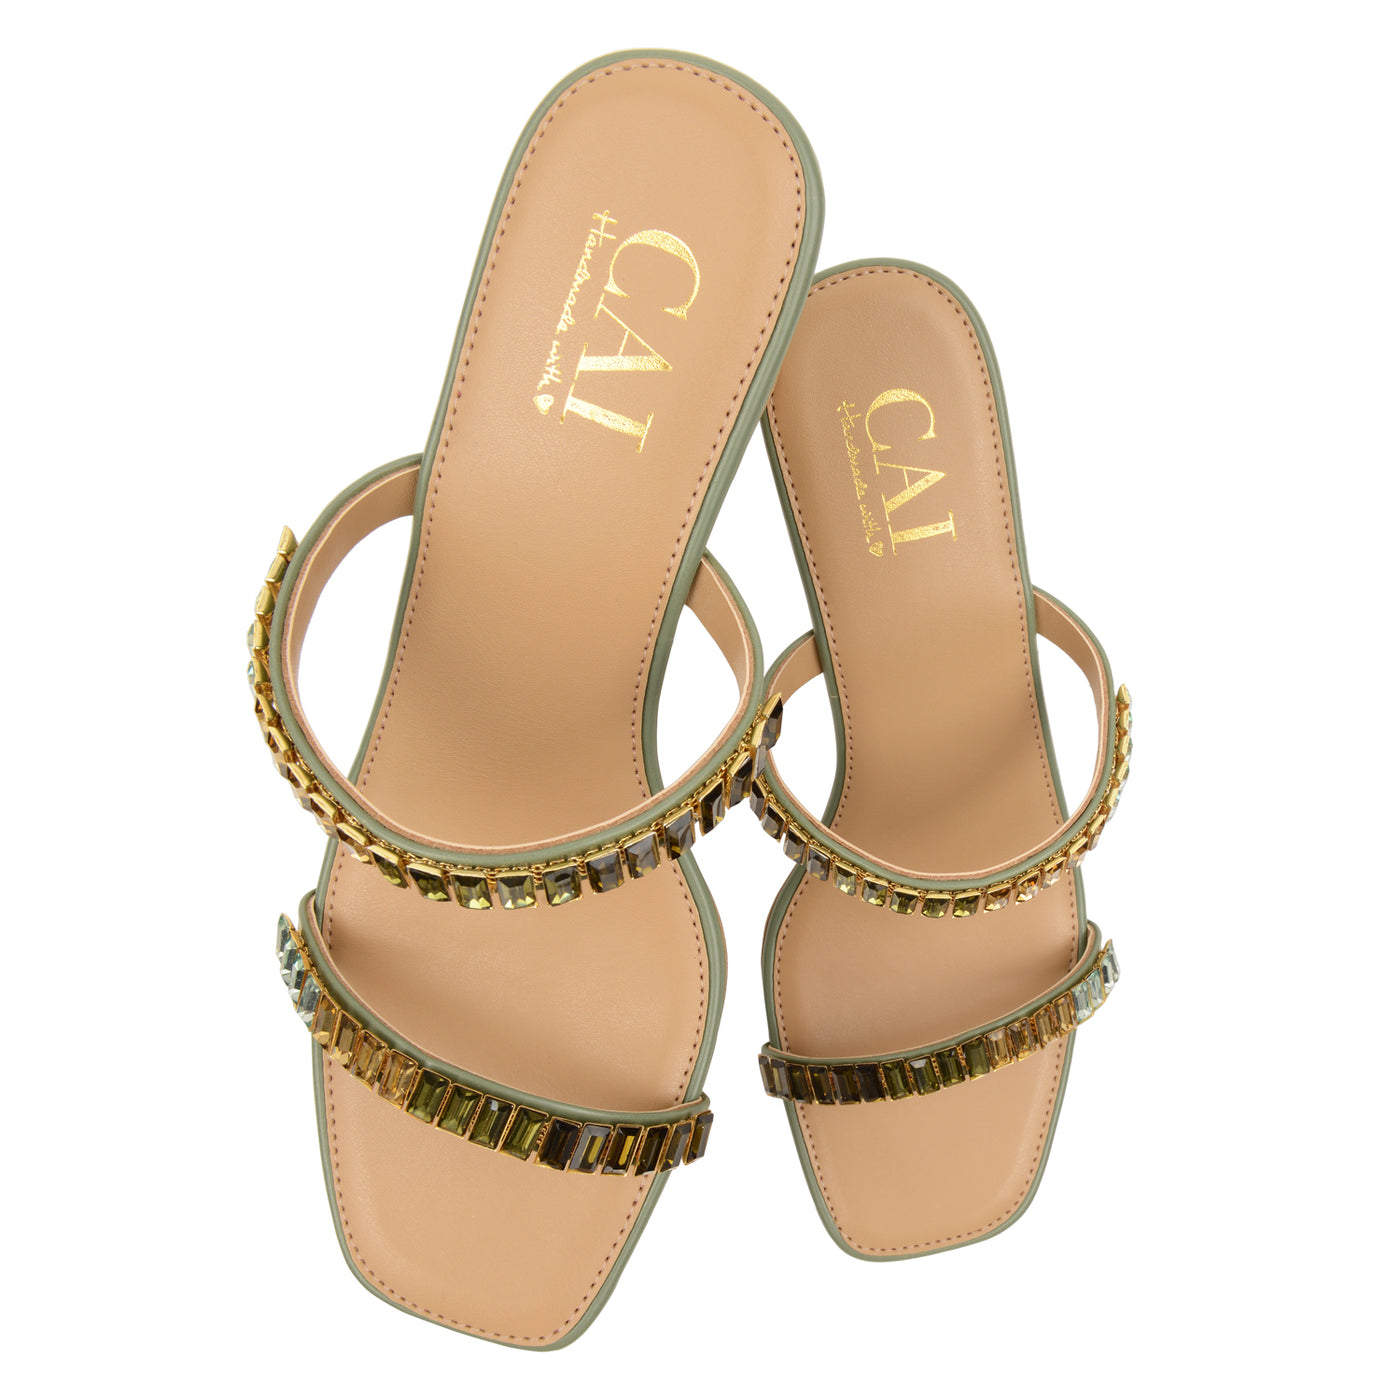 Two Strap Olive Embellished Heels at The Cai Store